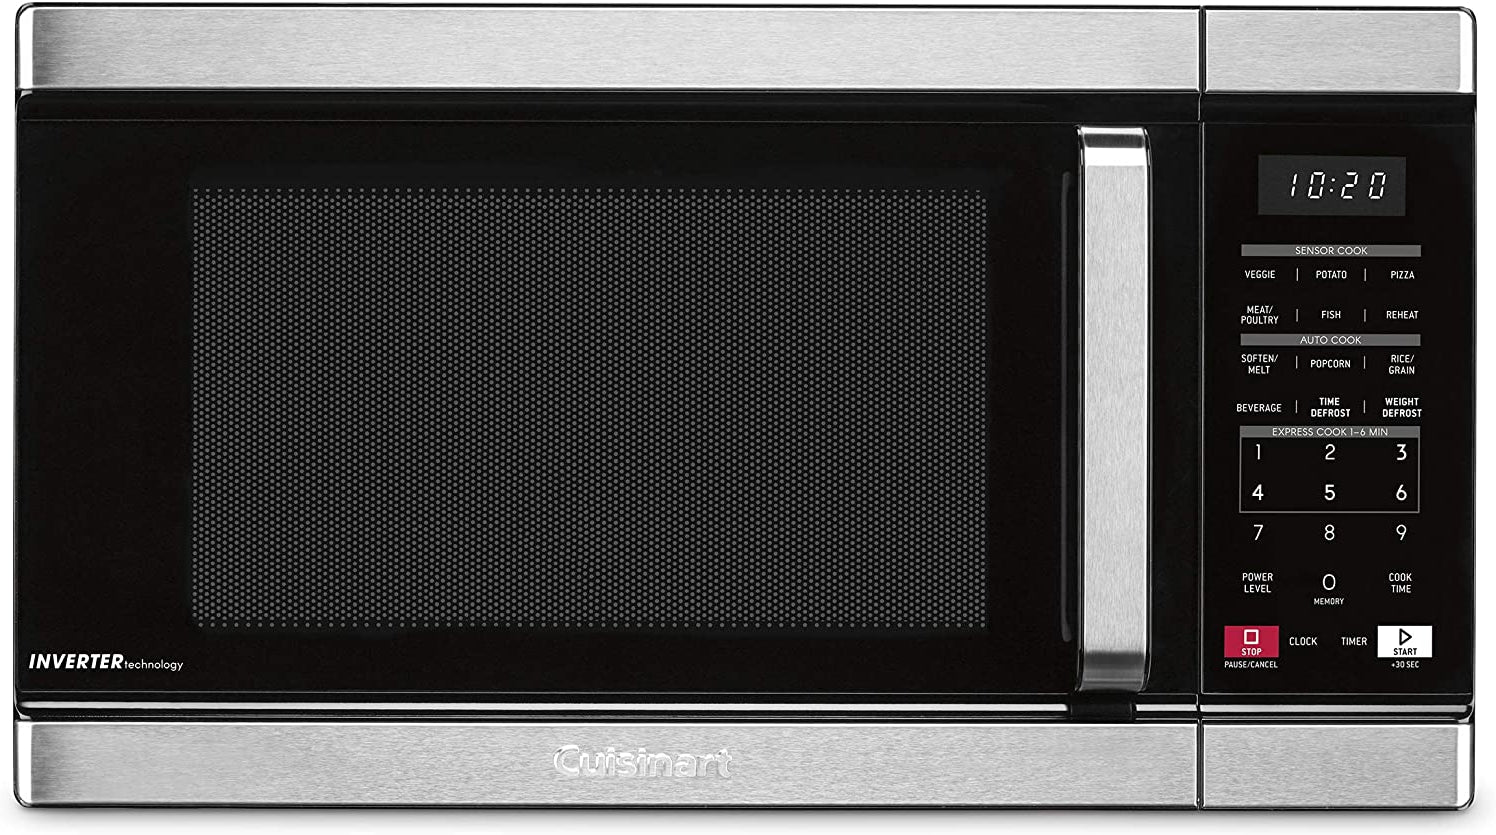 Cuisinart - Microwave With Sensor Cook & Inverter Technology - CMW-110C